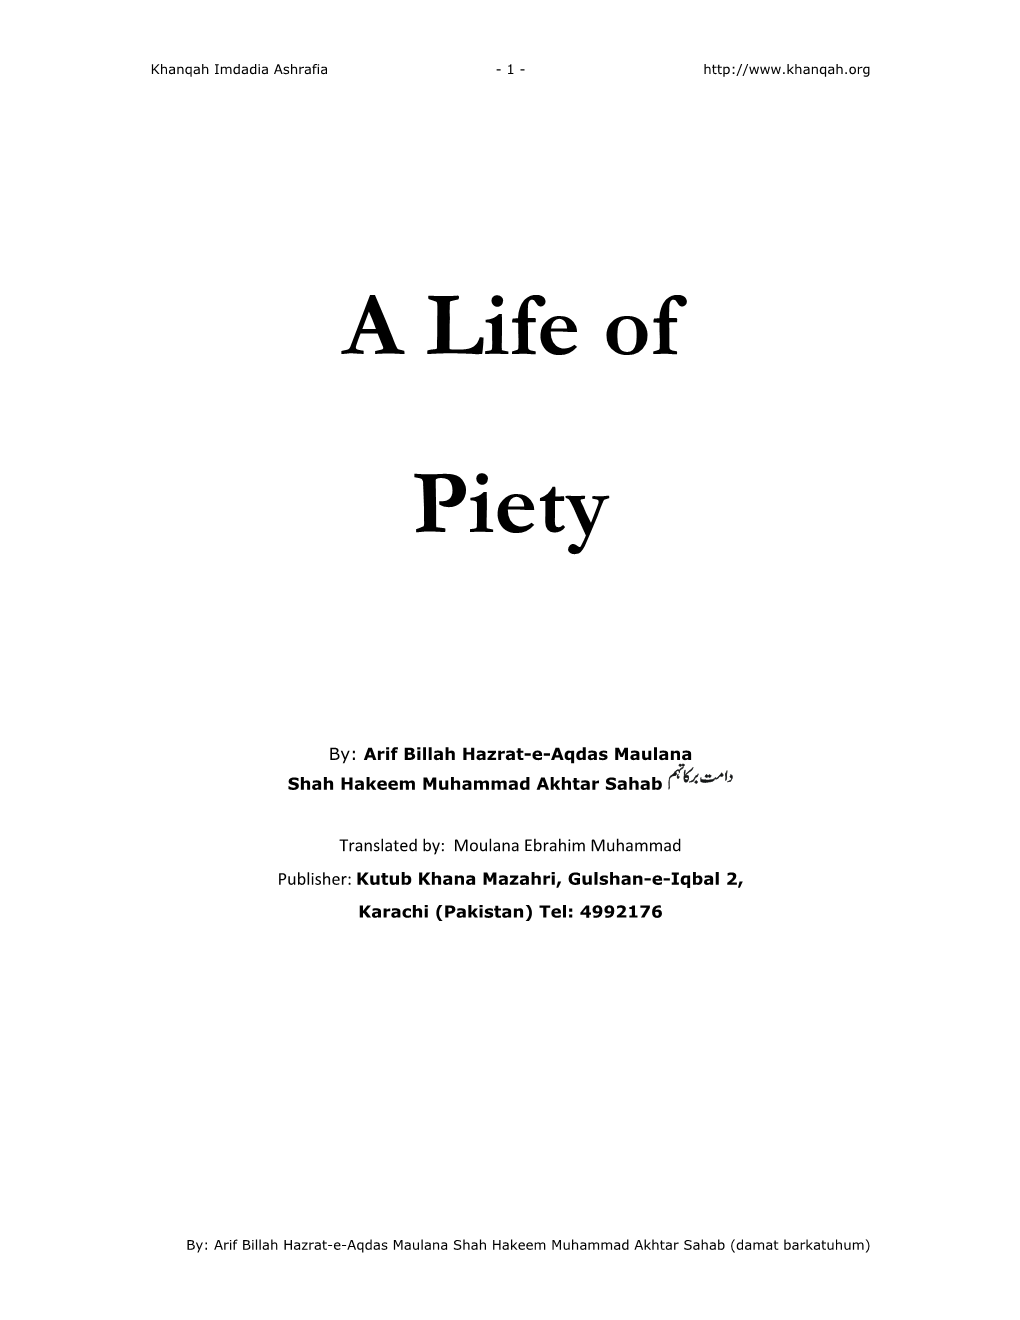 A Life of Piety